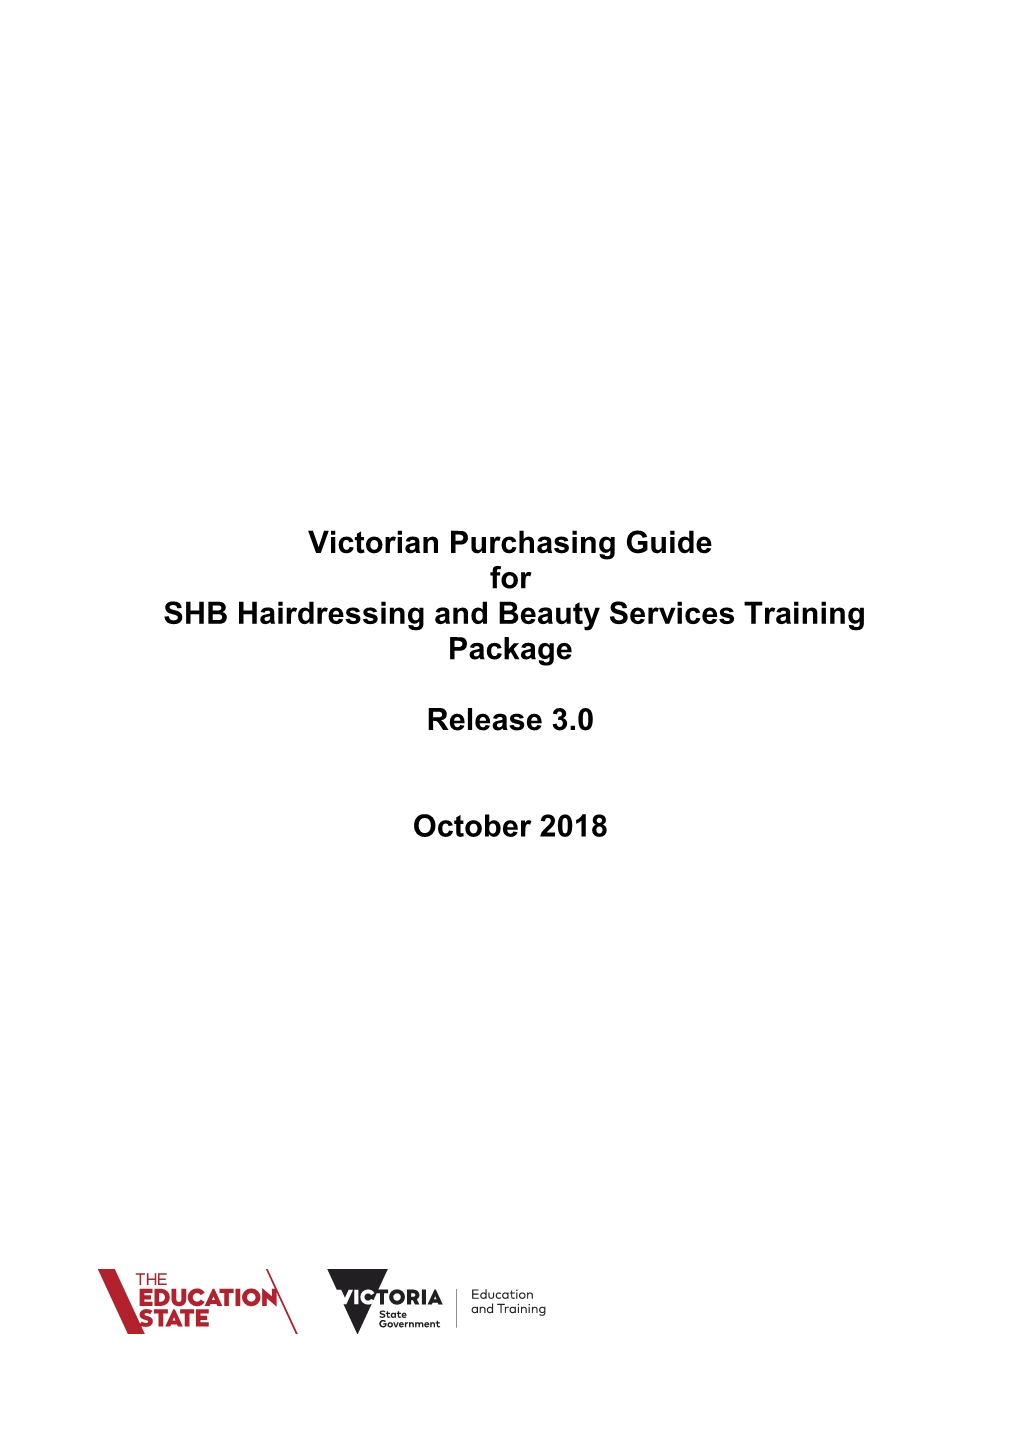 Victorian Purchasing Guide for SHB Hairdressing and Beauty Services Training Package